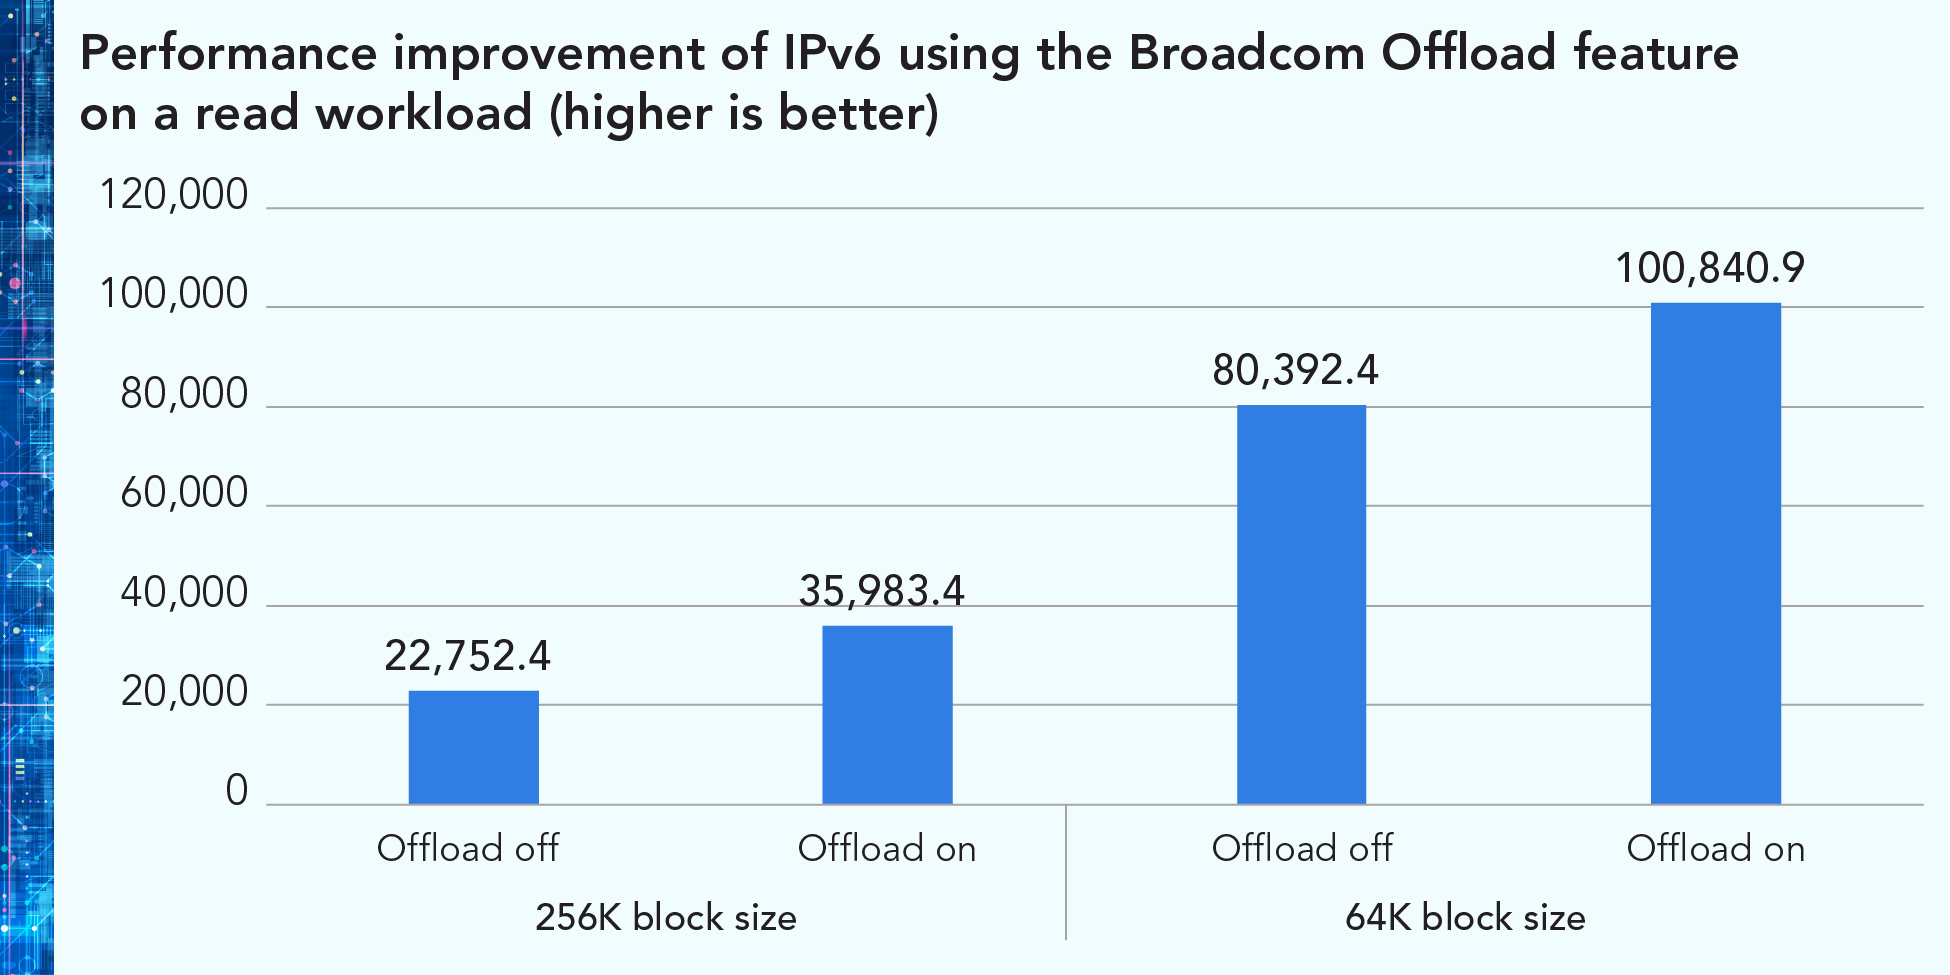 Chart showing performance improvement of IPv6 using Offload feature on a read workload. Higher is better. At the 256K block size, the score was 22,752.4 with Offload off and 35,983.4 with Offload on. At the 64K block size, the score was 80,392.4 with Offload off and 100,840.9 with Offload on.